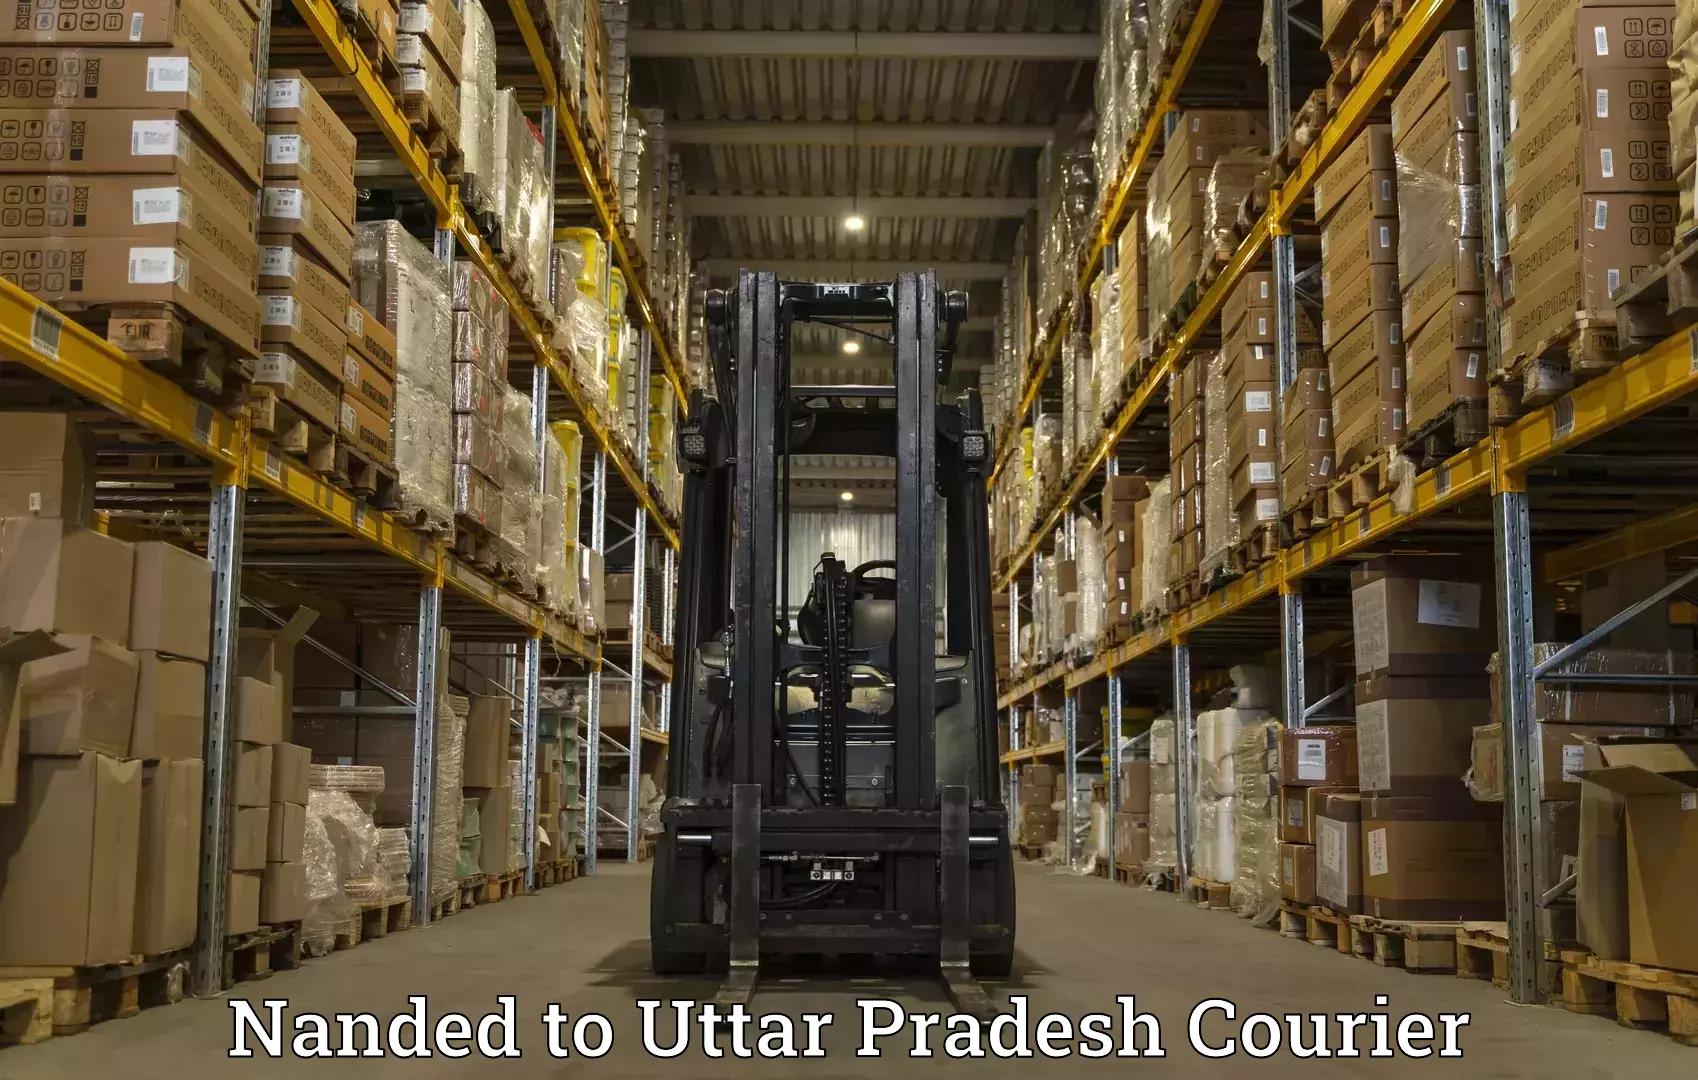 Subscription-based courier Nanded to Uttar Pradesh